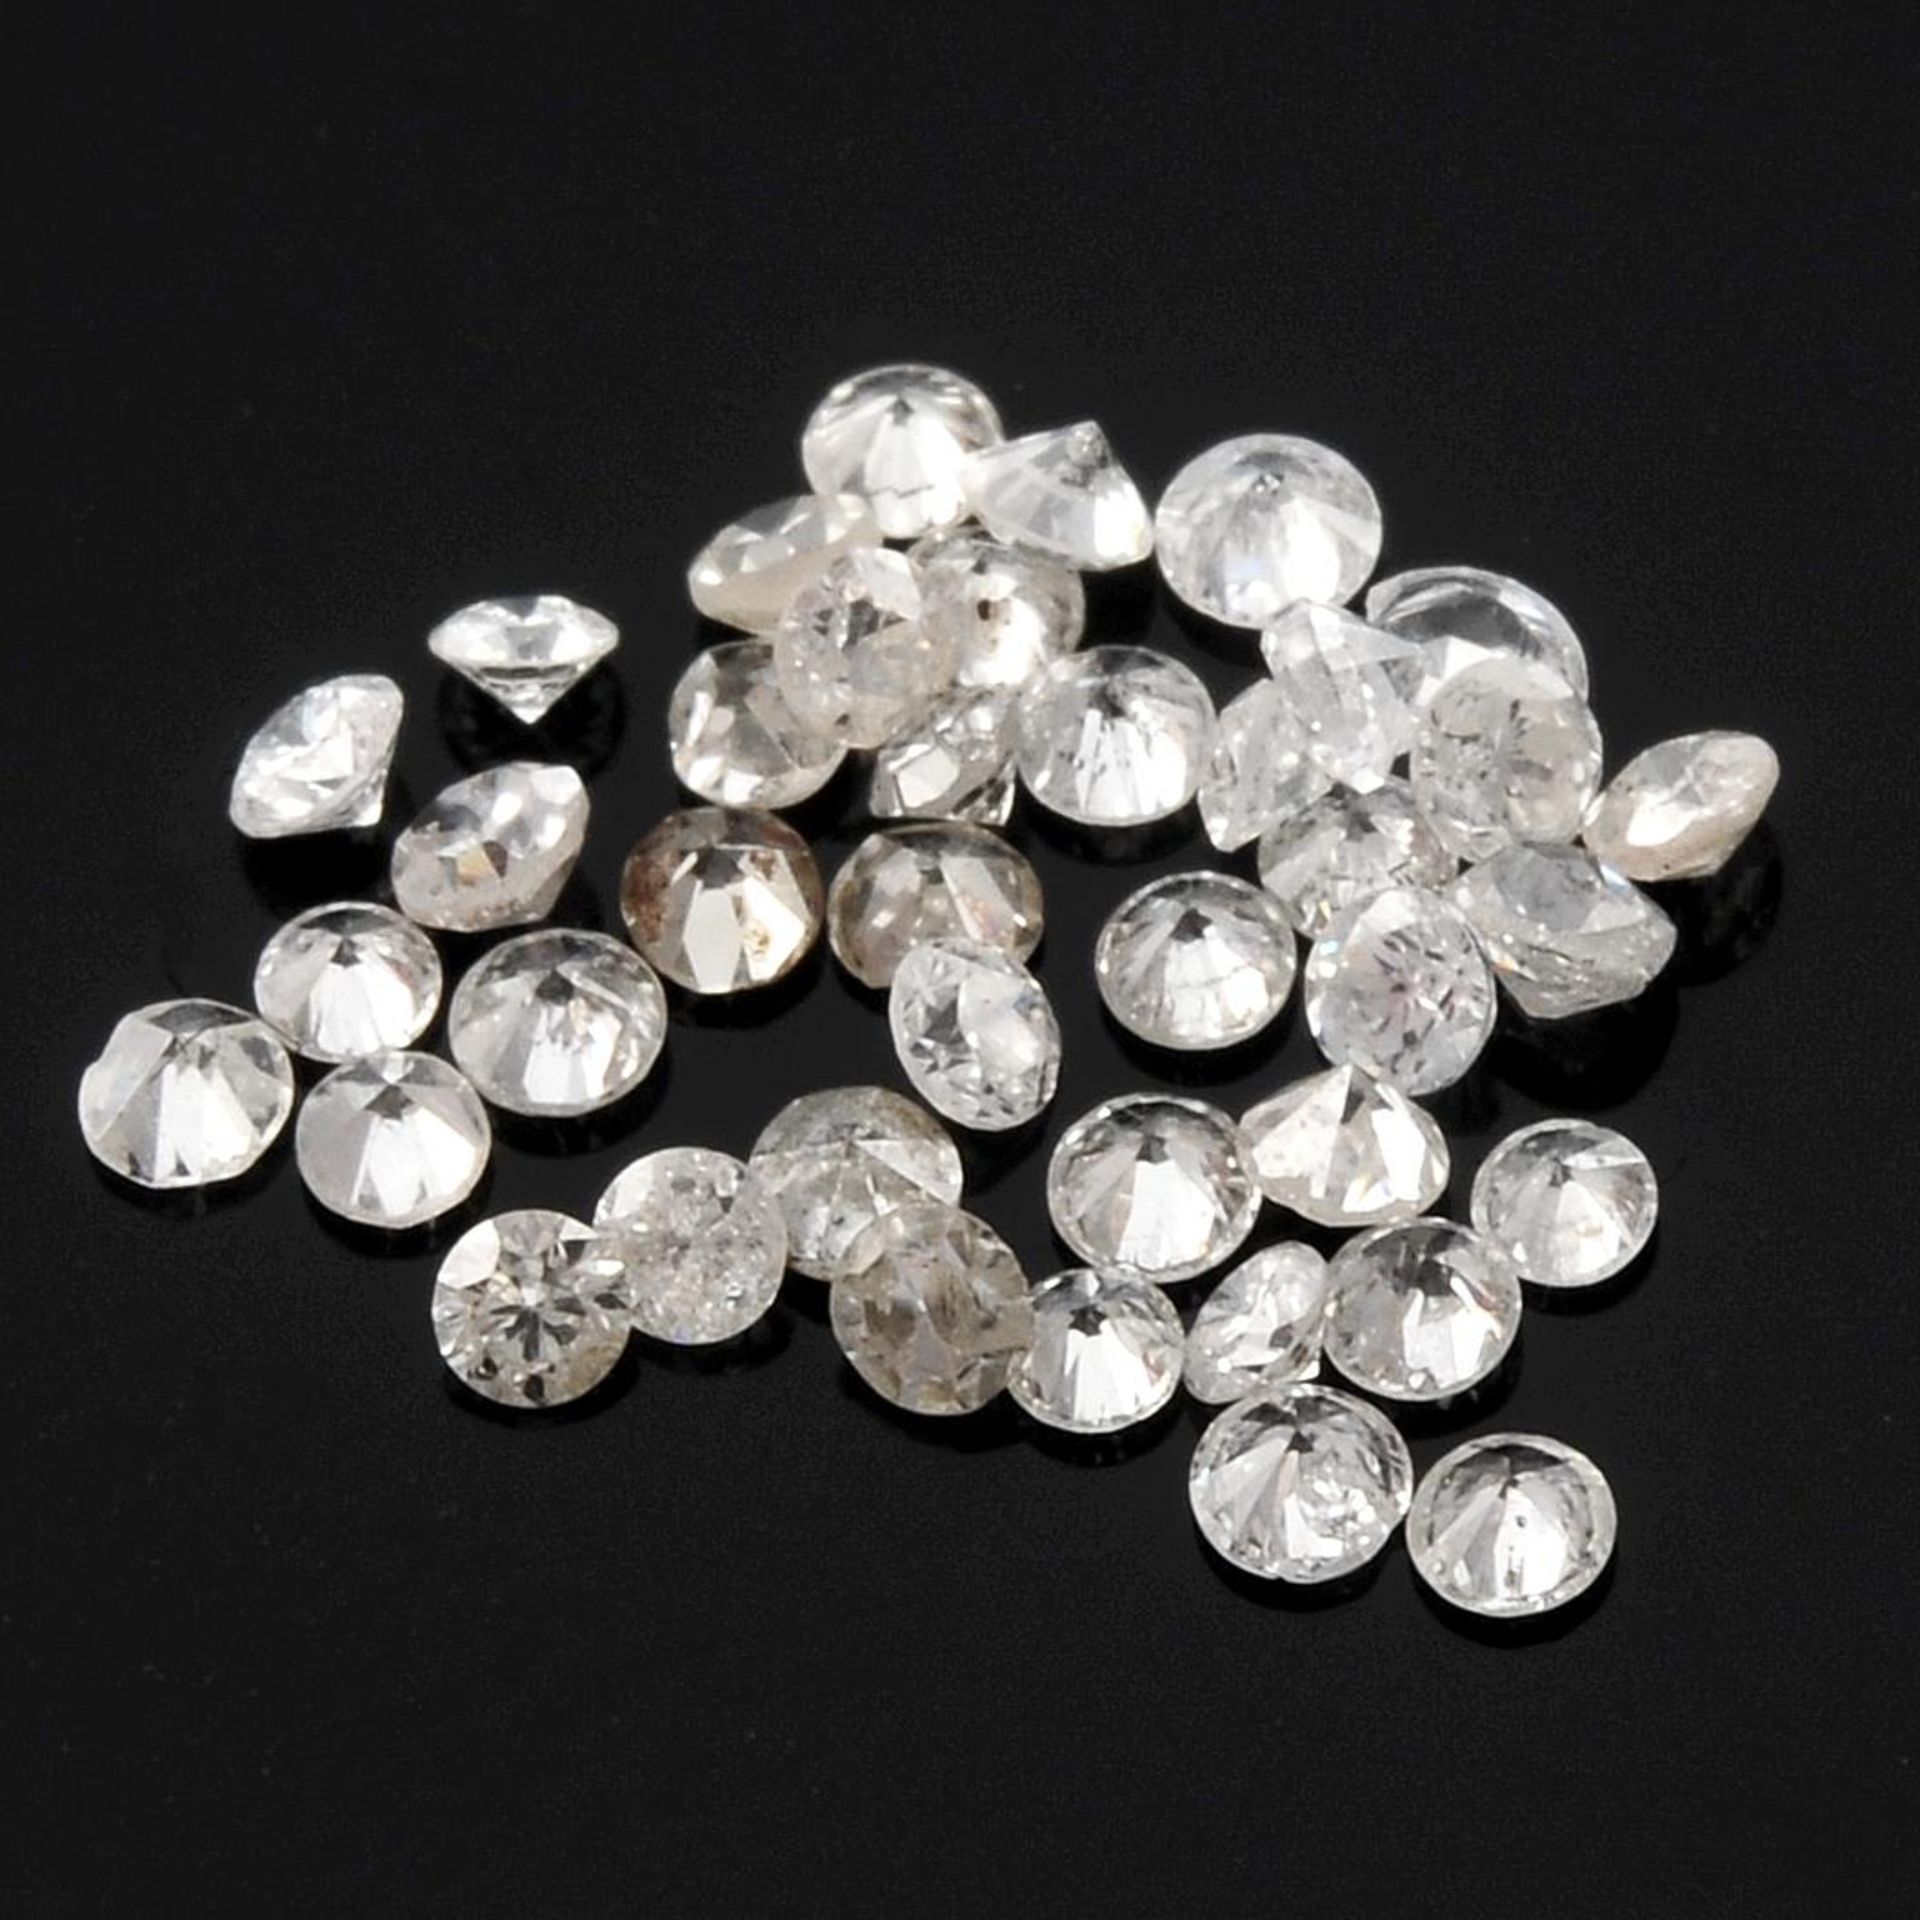 Selection of brilliant cut diamonds, weighing 4.02ct.